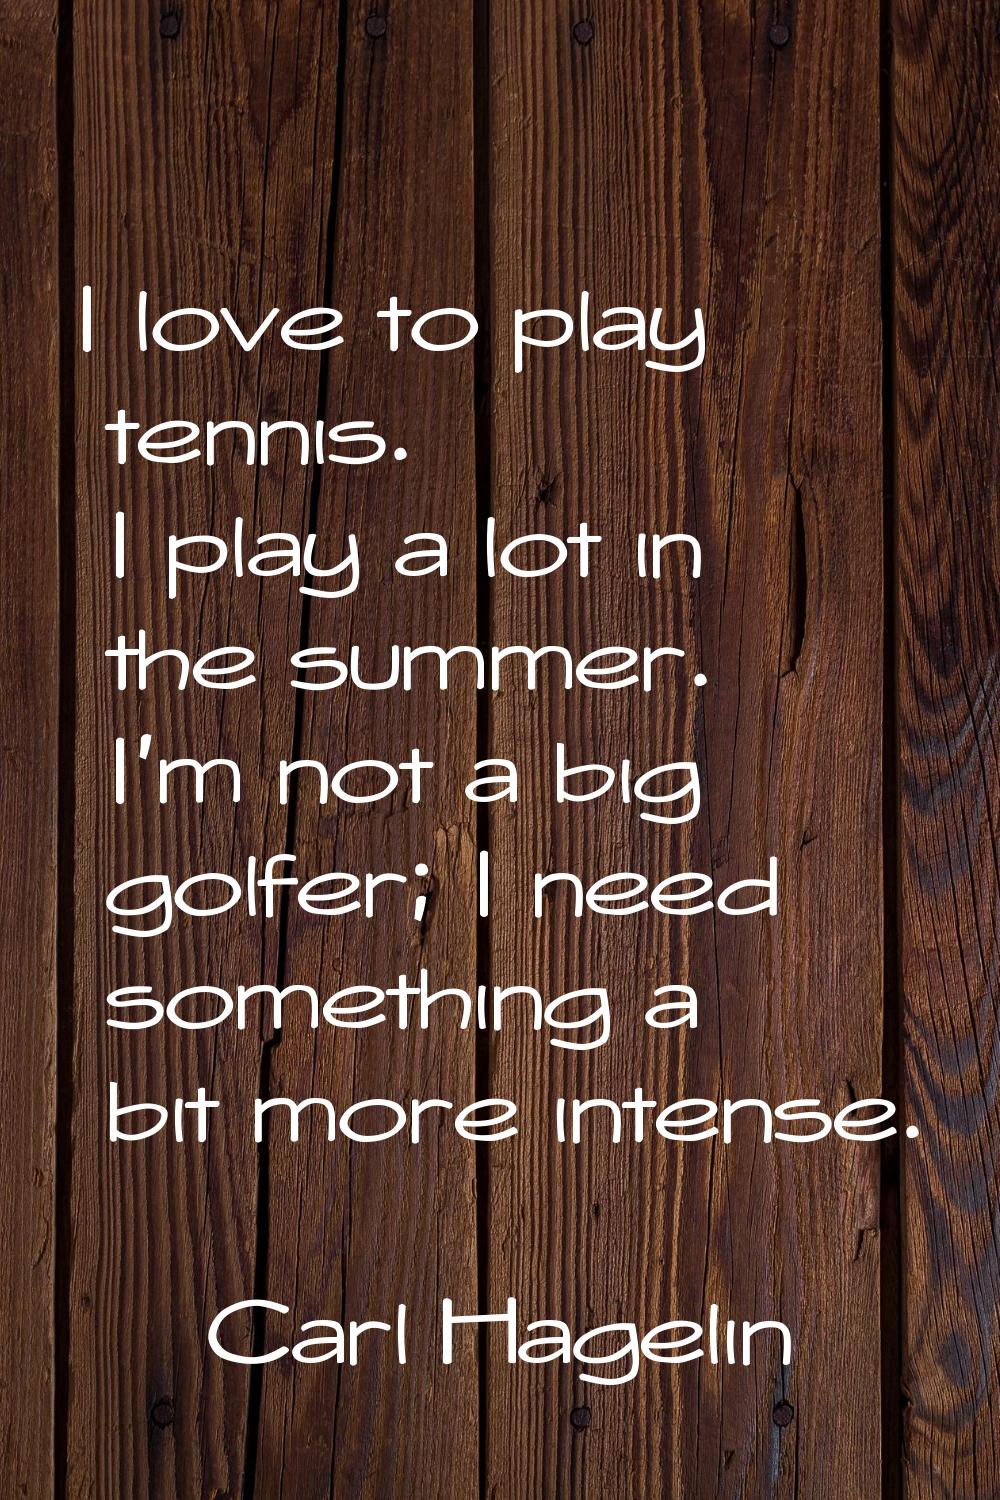 I love to play tennis. I play a lot in the summer. I'm not a big golfer; I need something a bit mor